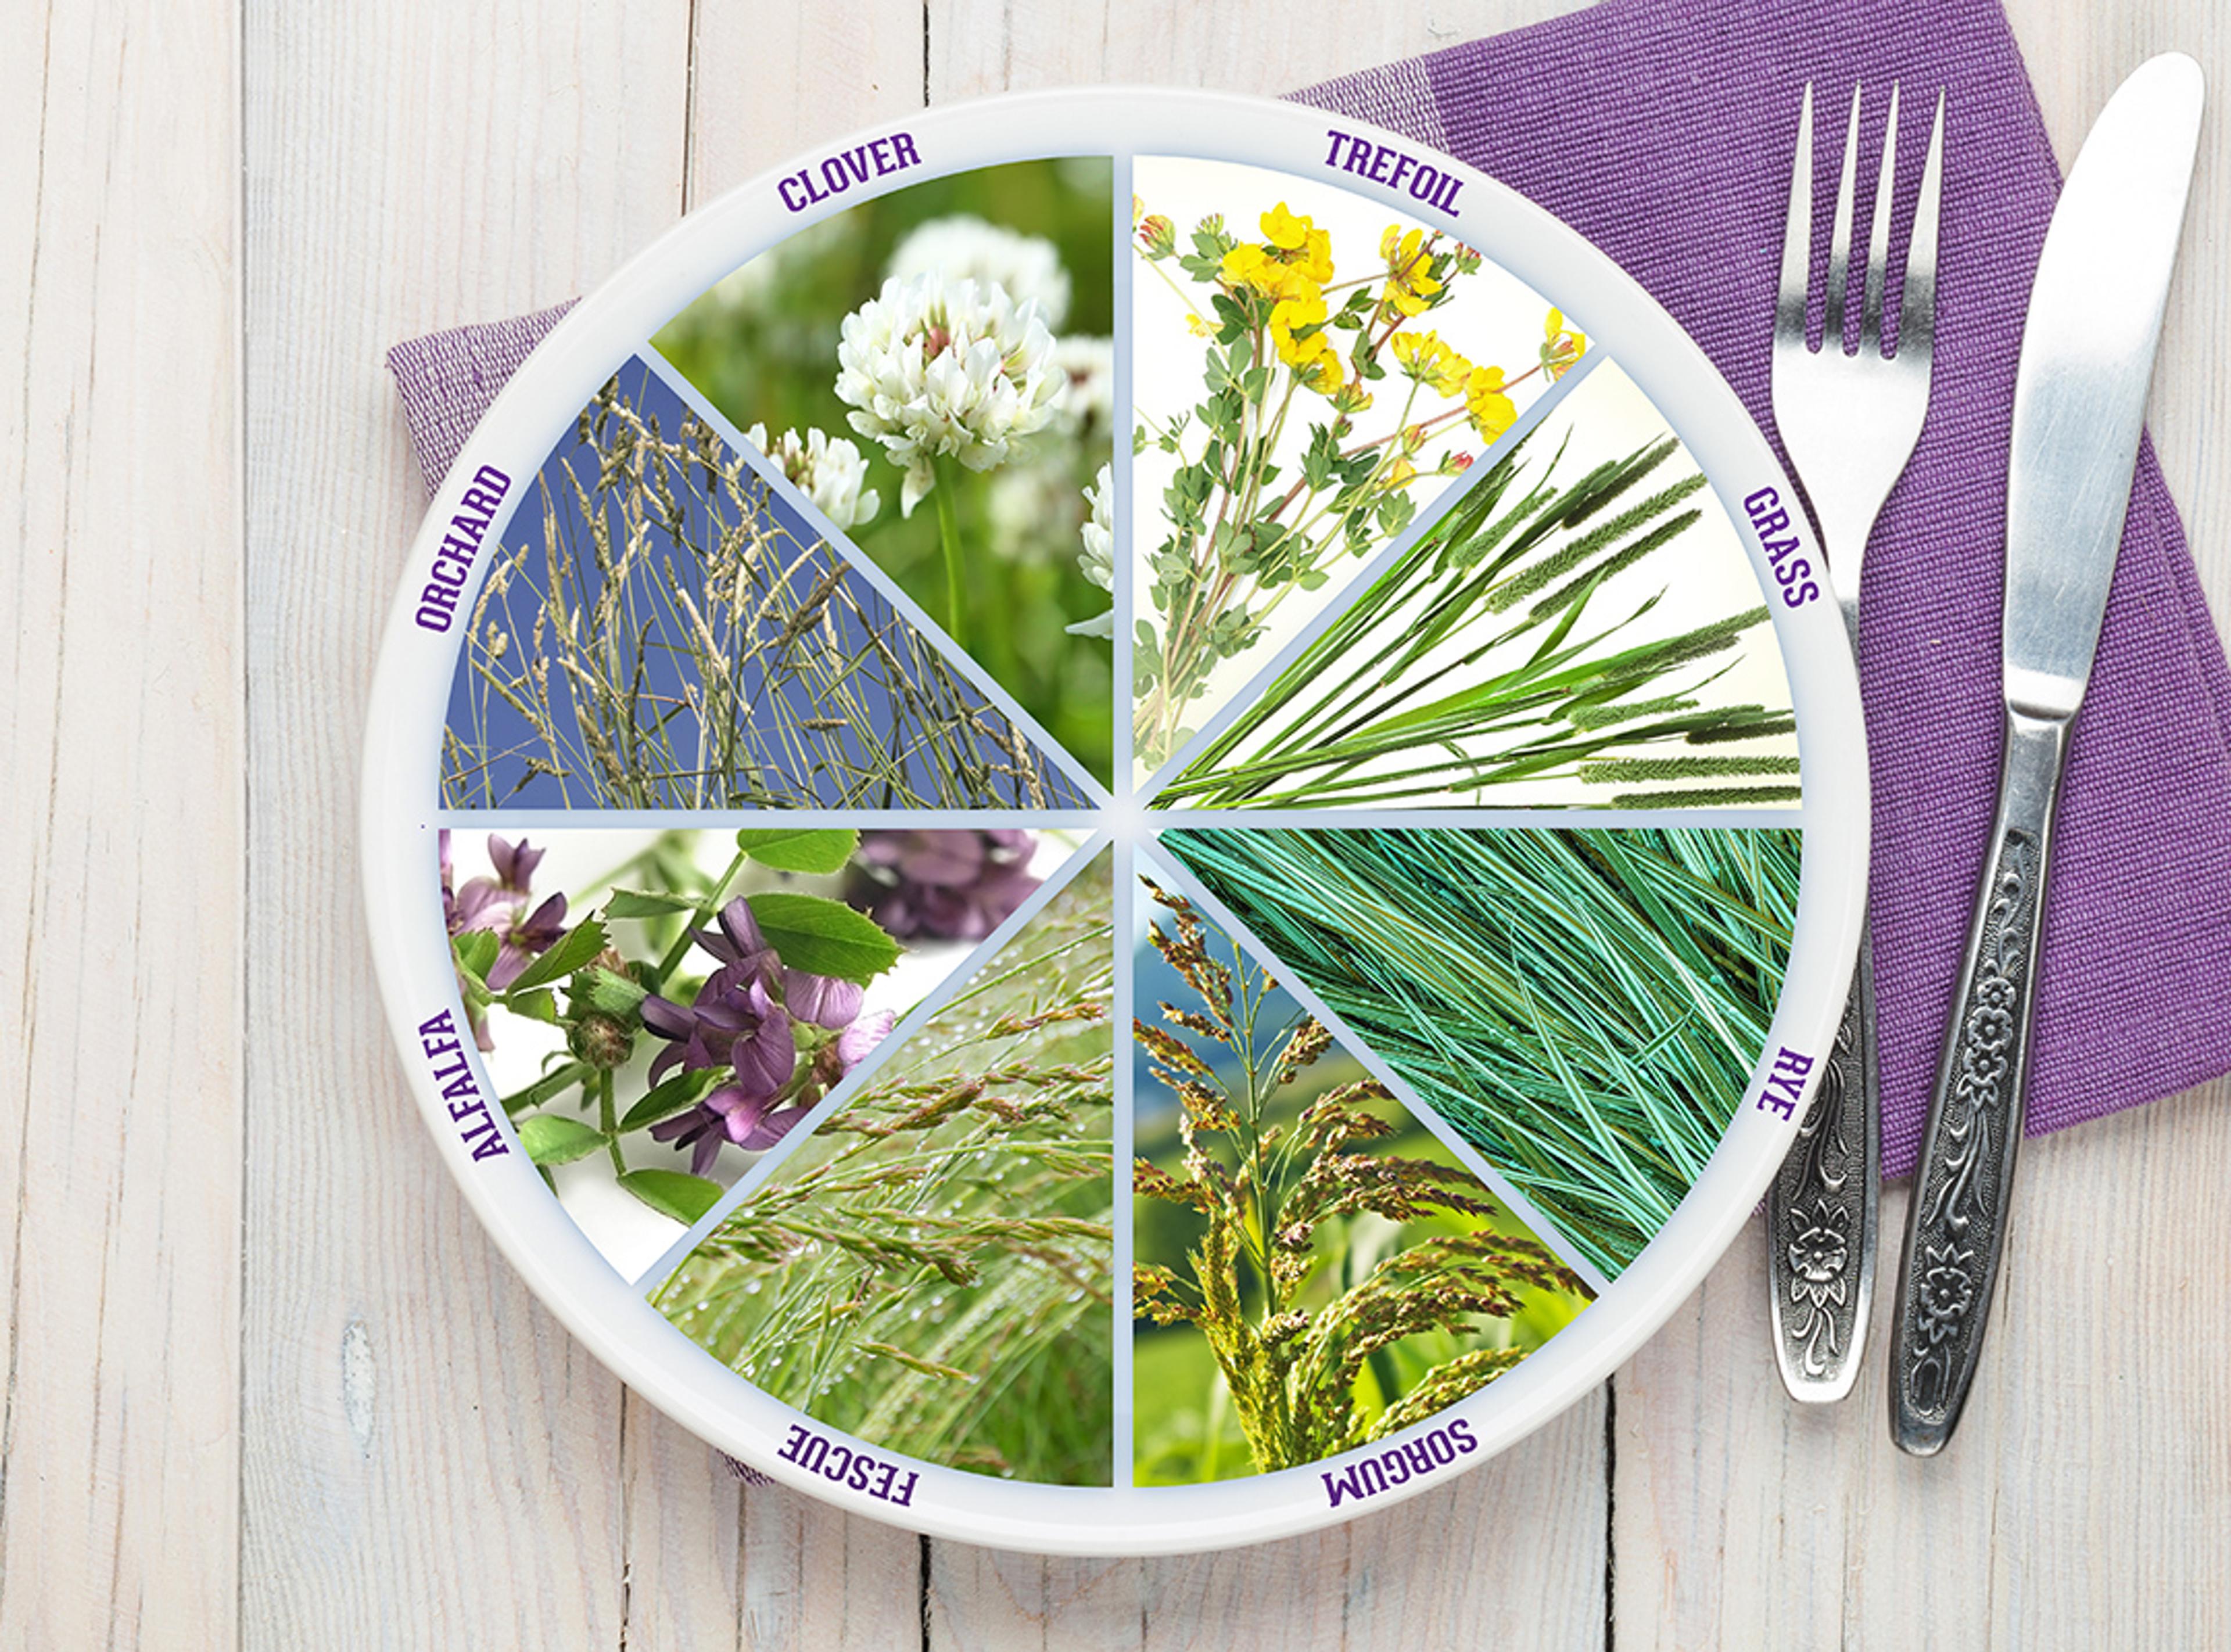 A graphical image of a plate with various pasture grasses represented in a pie-slice pattern.